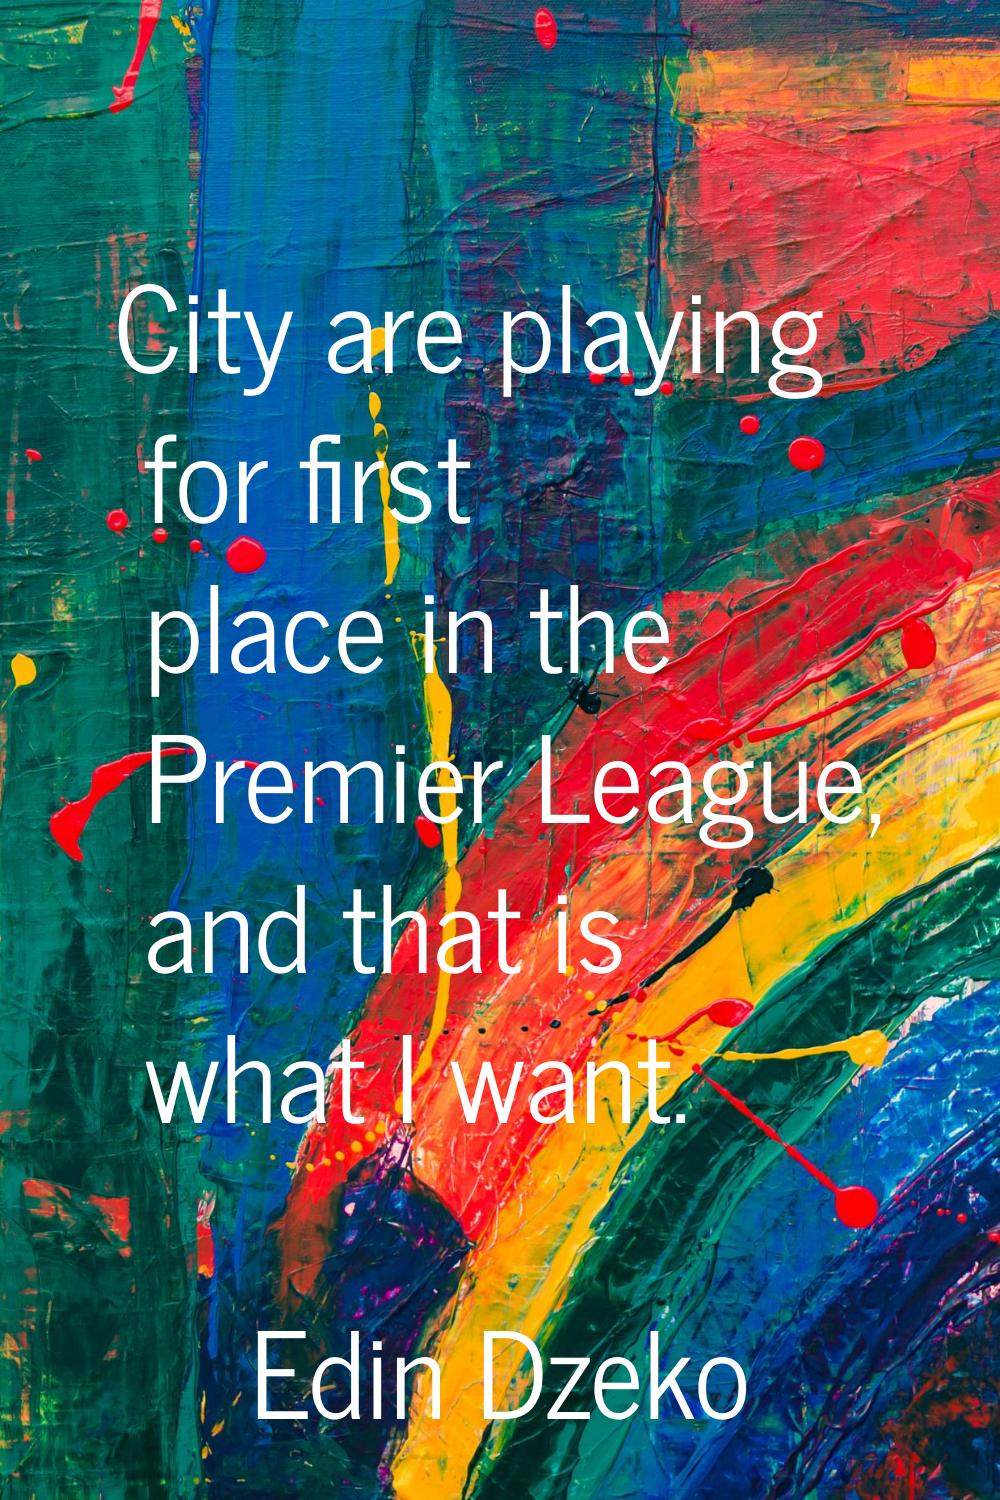 City are playing for first place in the Premier League, and that is what I want.